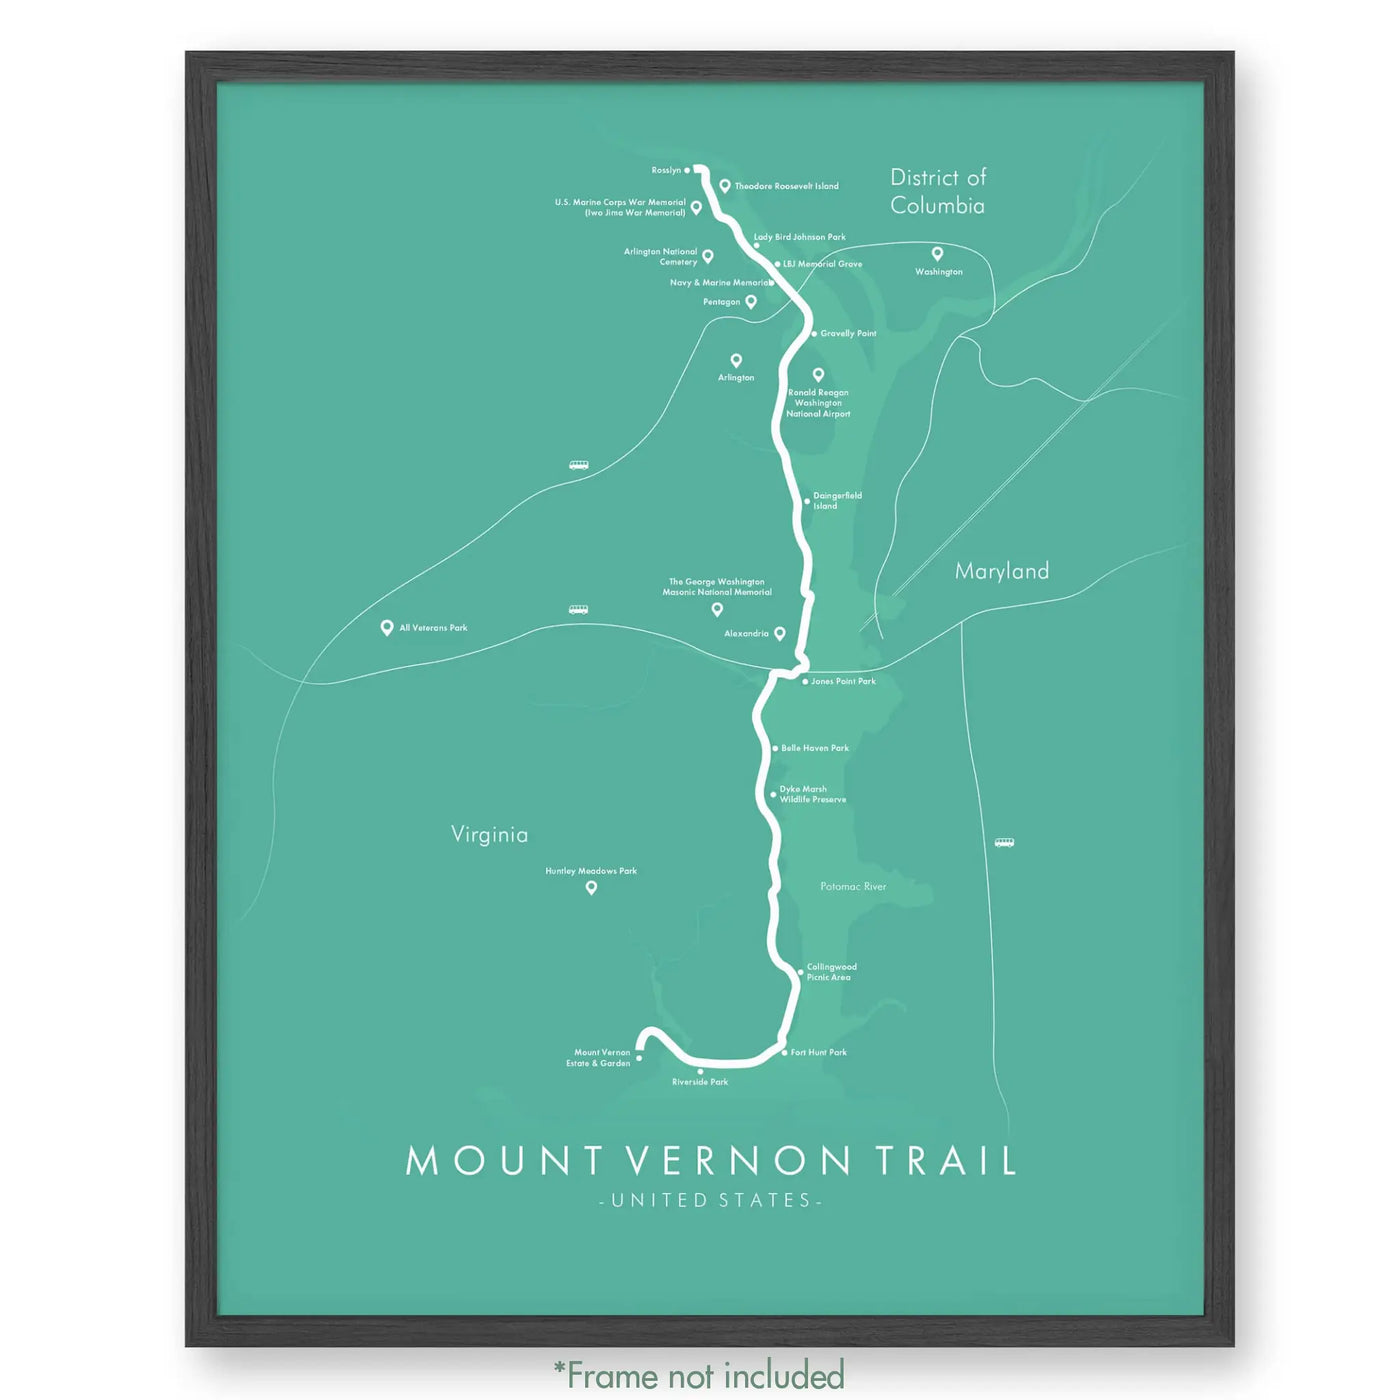 Trail Poster of Mount Vernon Trail - Teal